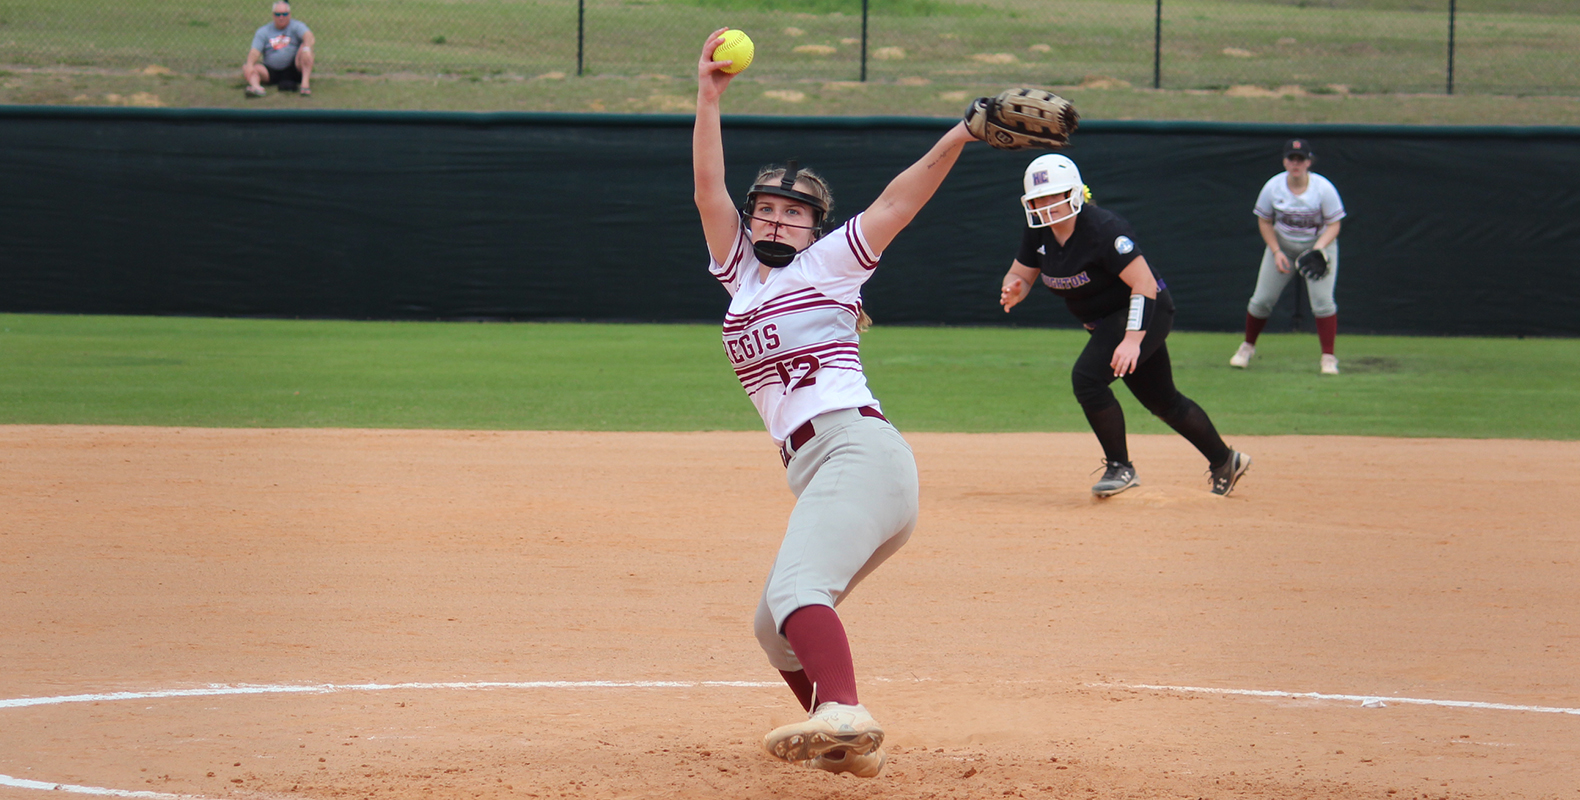 Softball Splits Doubleheader with Lasell